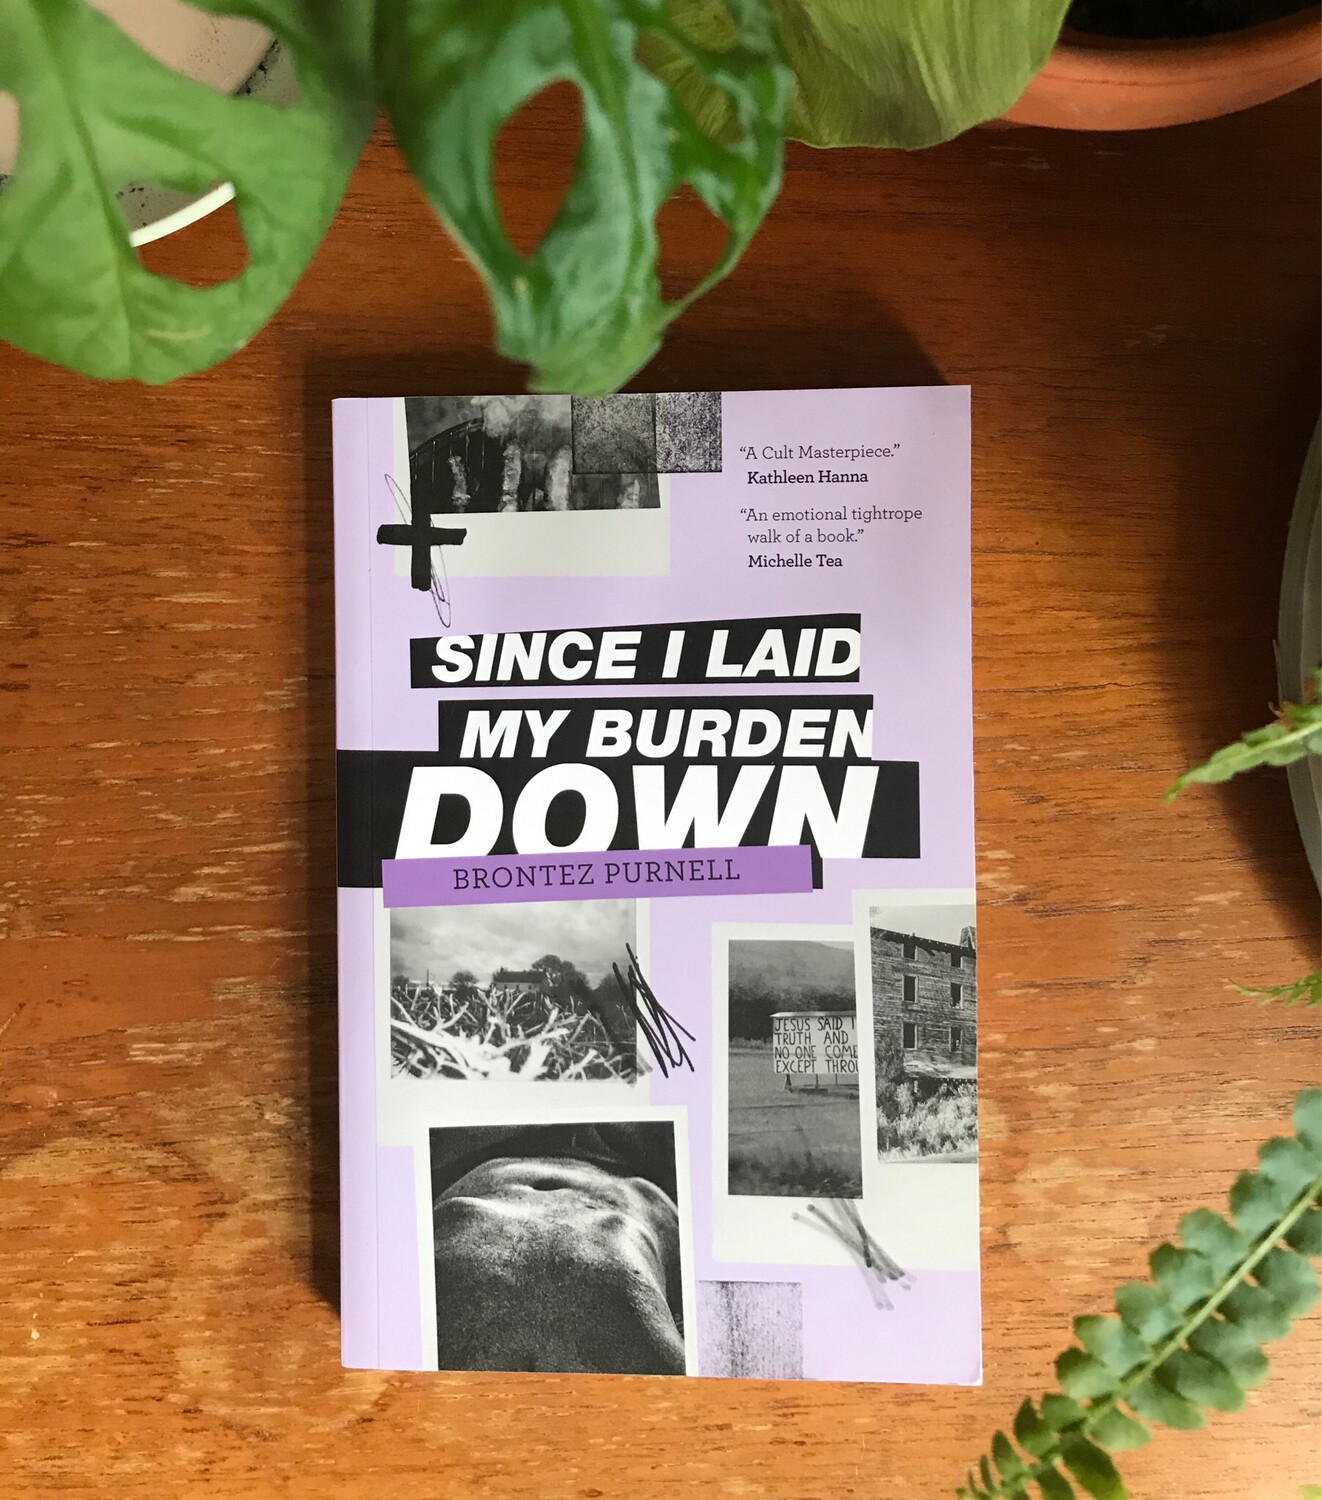 Since I Laid My Burden Down By Brontez Purnell